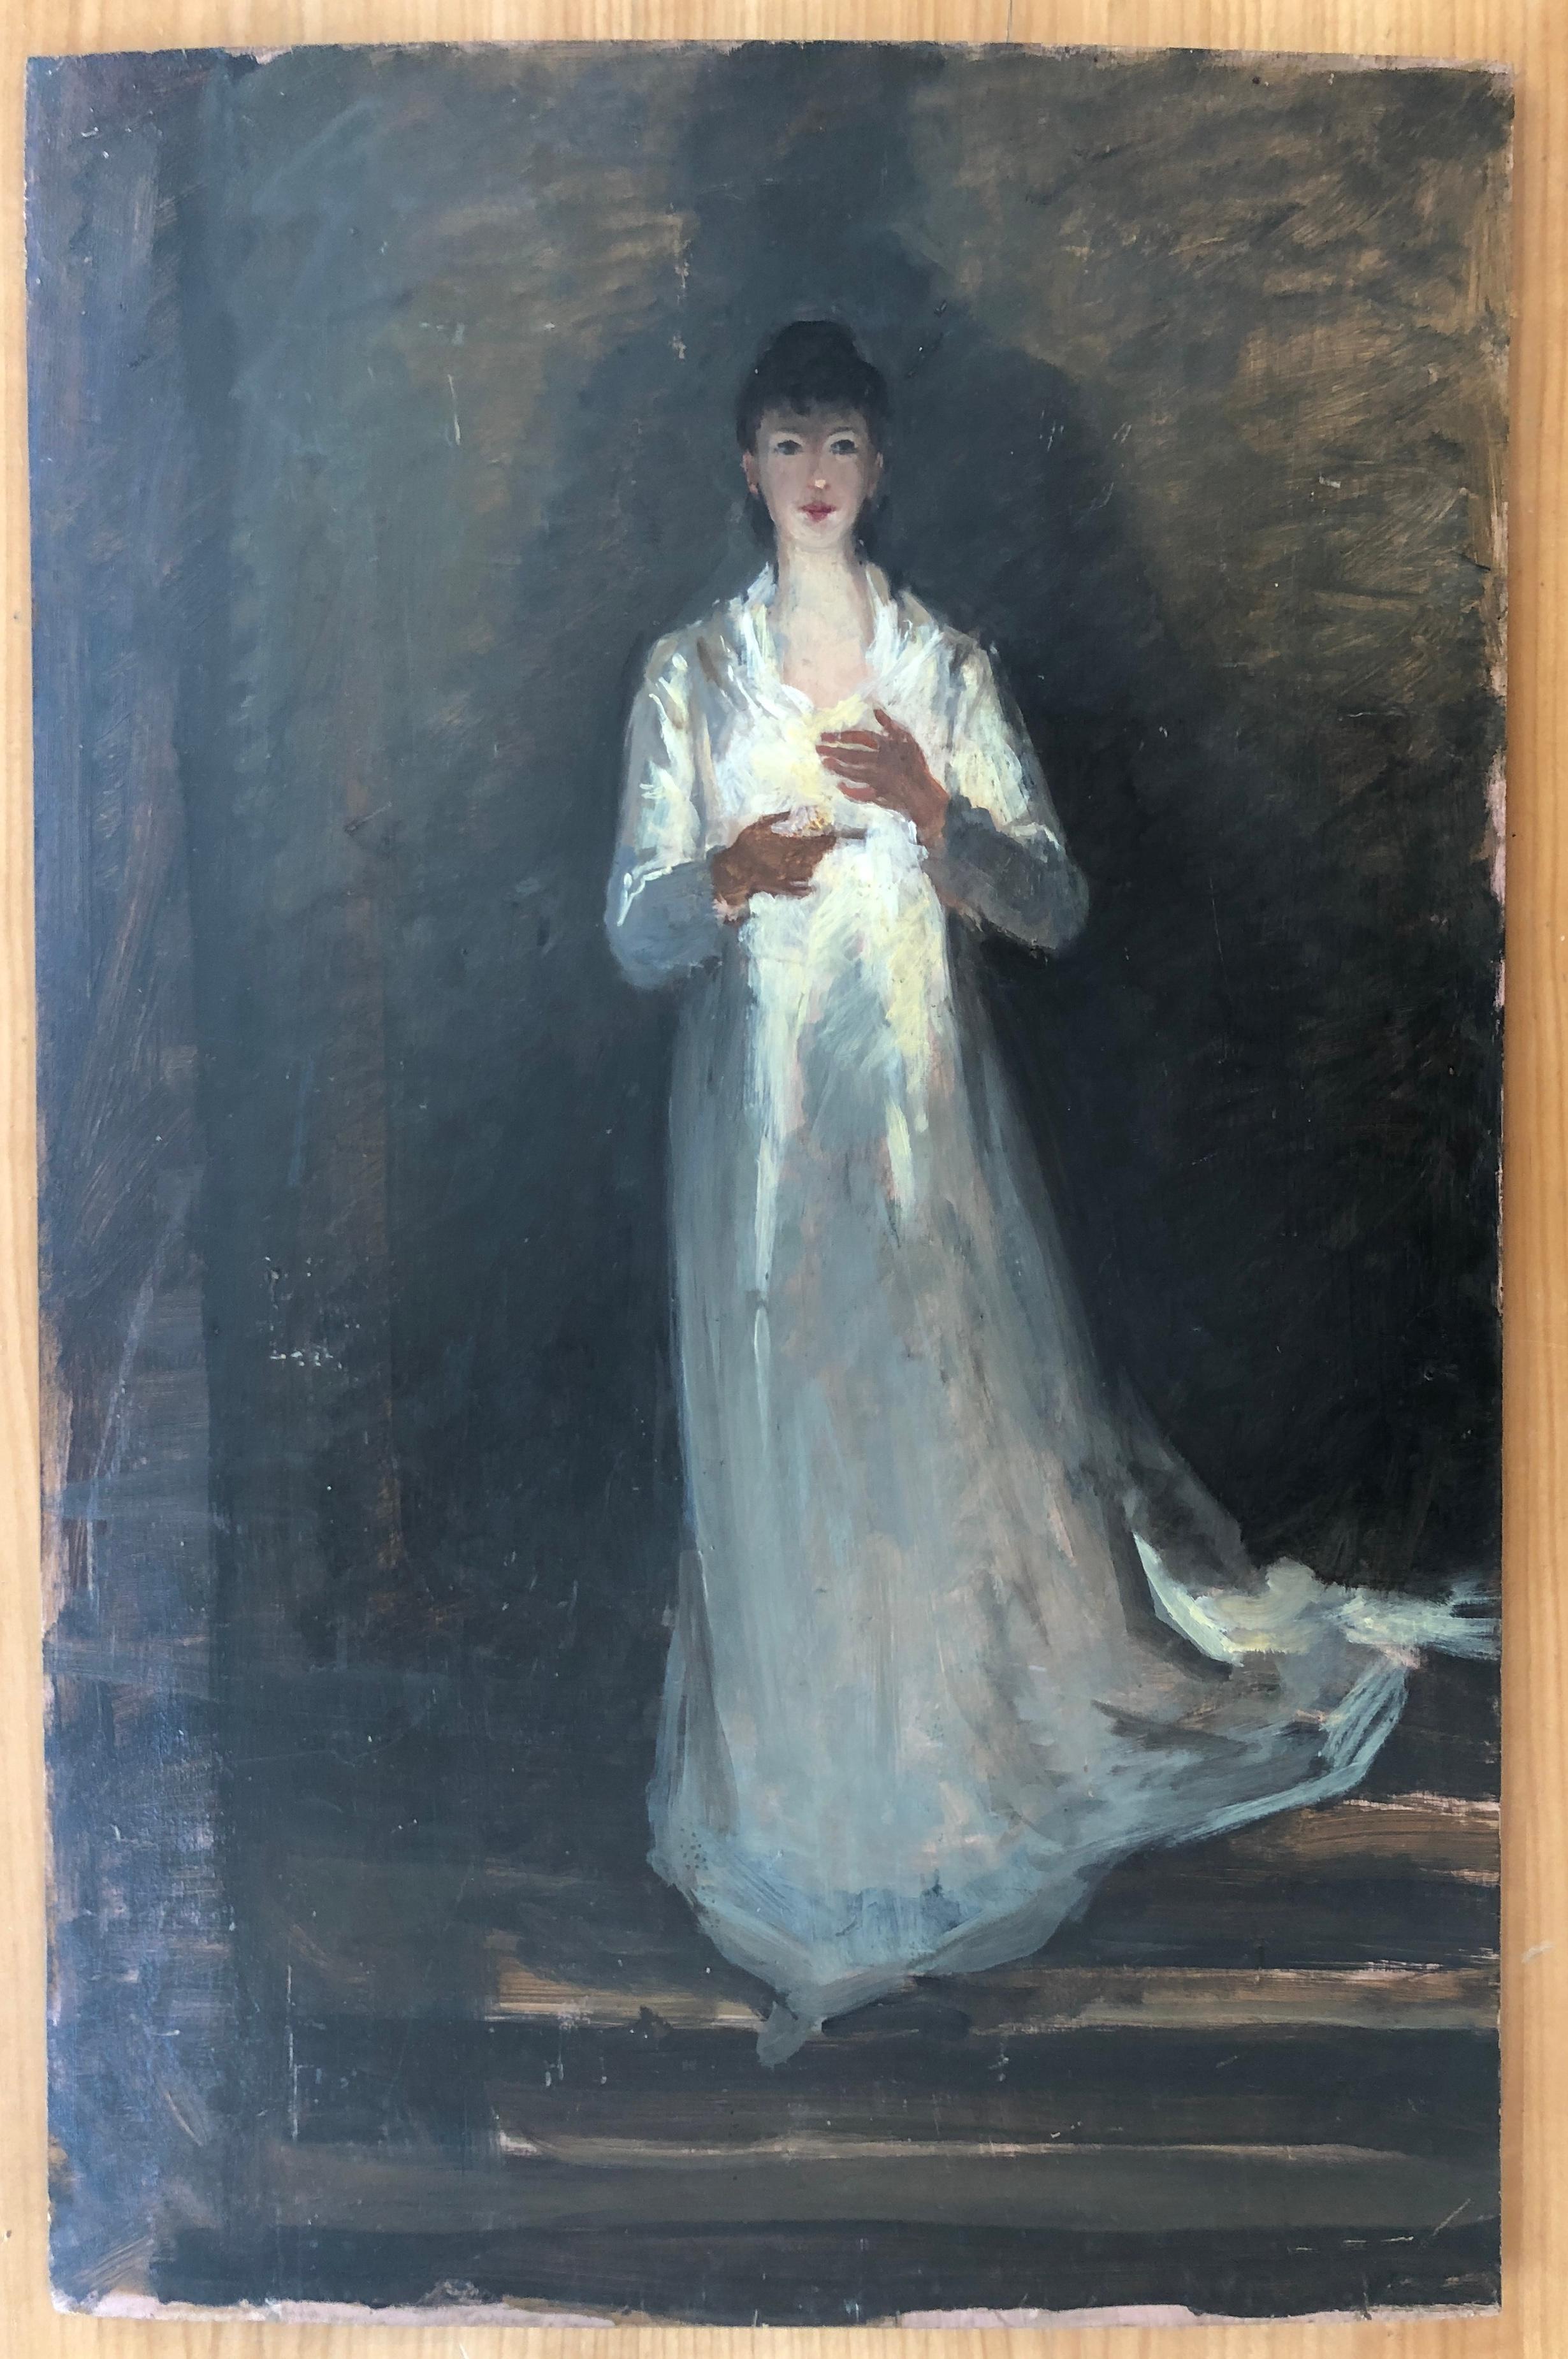 Study of a young woman at night lighting herself with a candle - Painting by Unknown